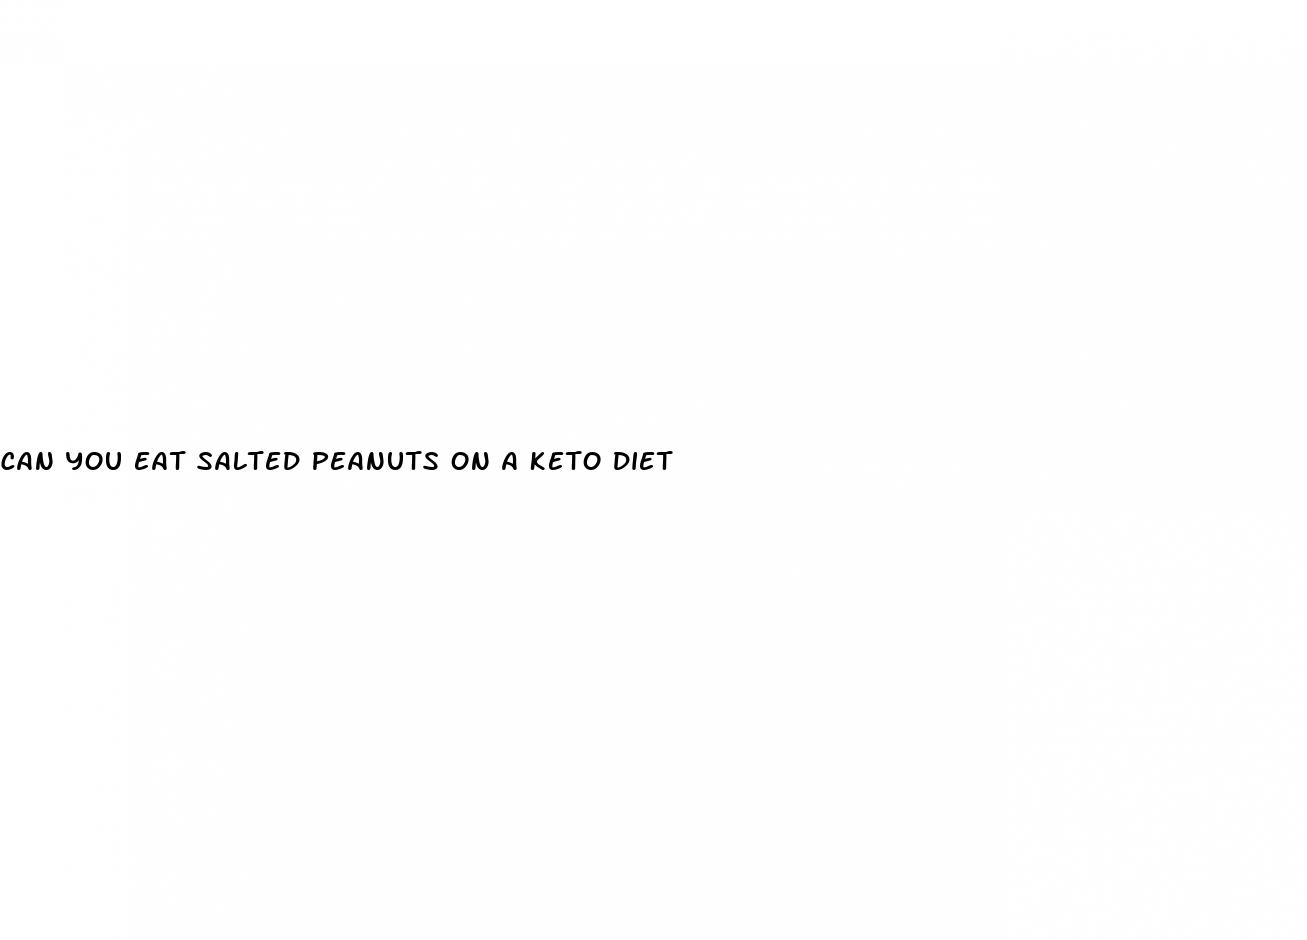 can you eat salted peanuts on a keto diet